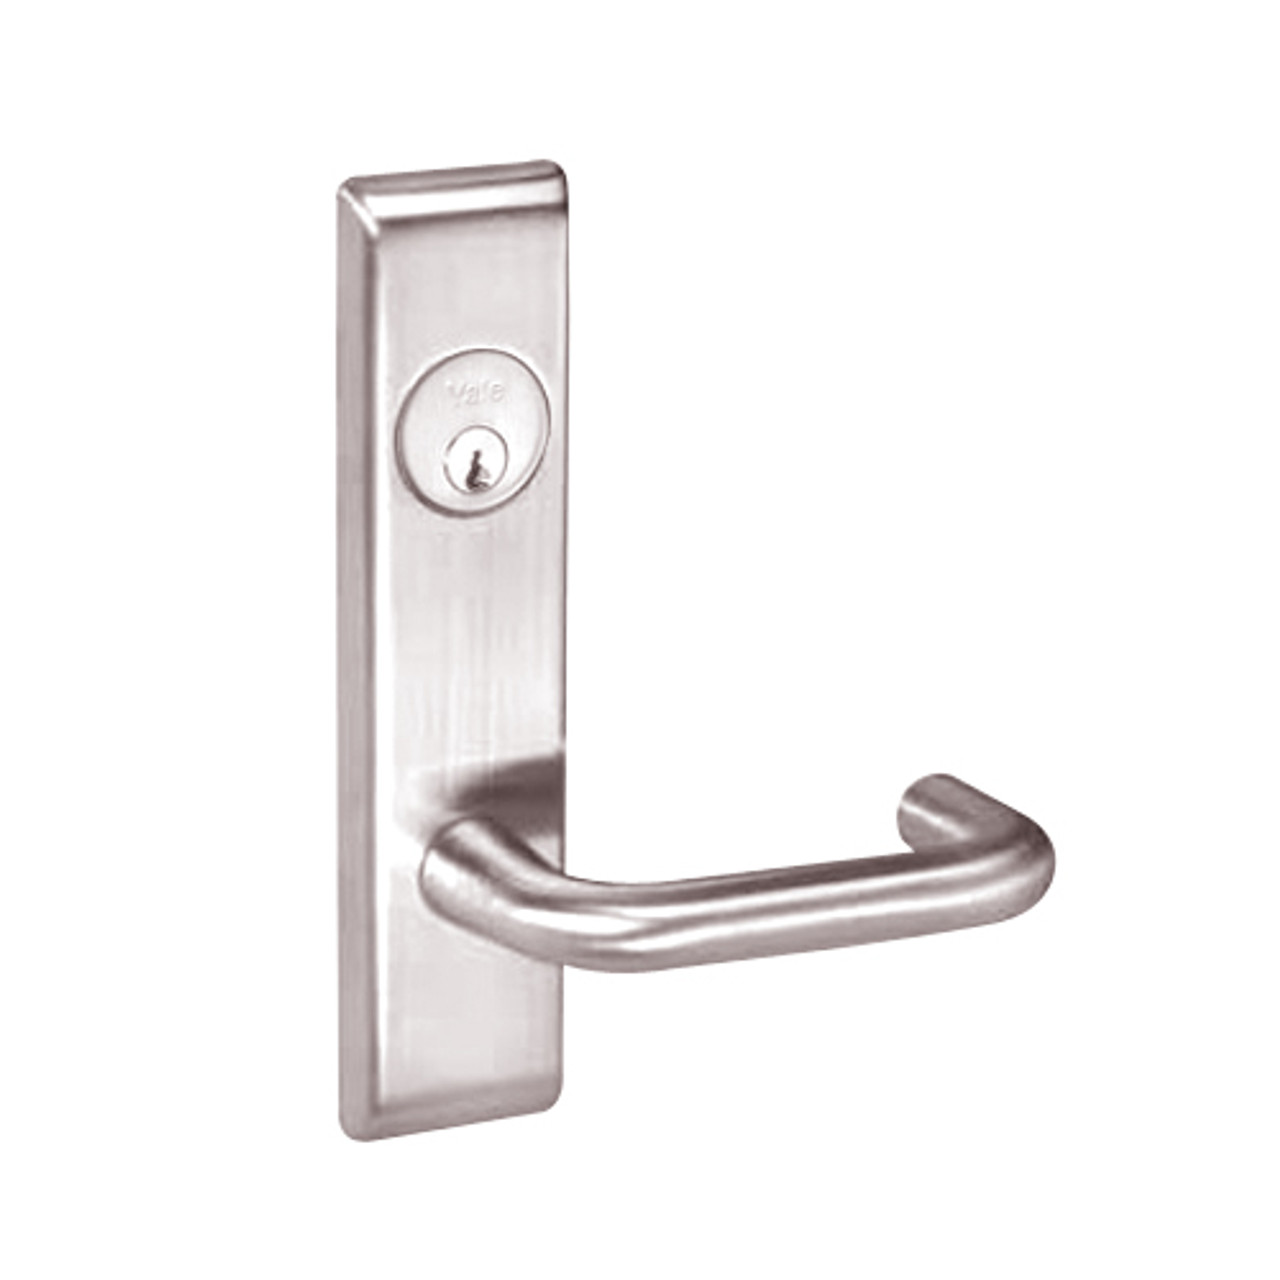 CRCN8833FL-629 Yale 8800FL Series Single Cylinder Mortise Exit Locks with Carmel Lever in Bright Stainless Steel